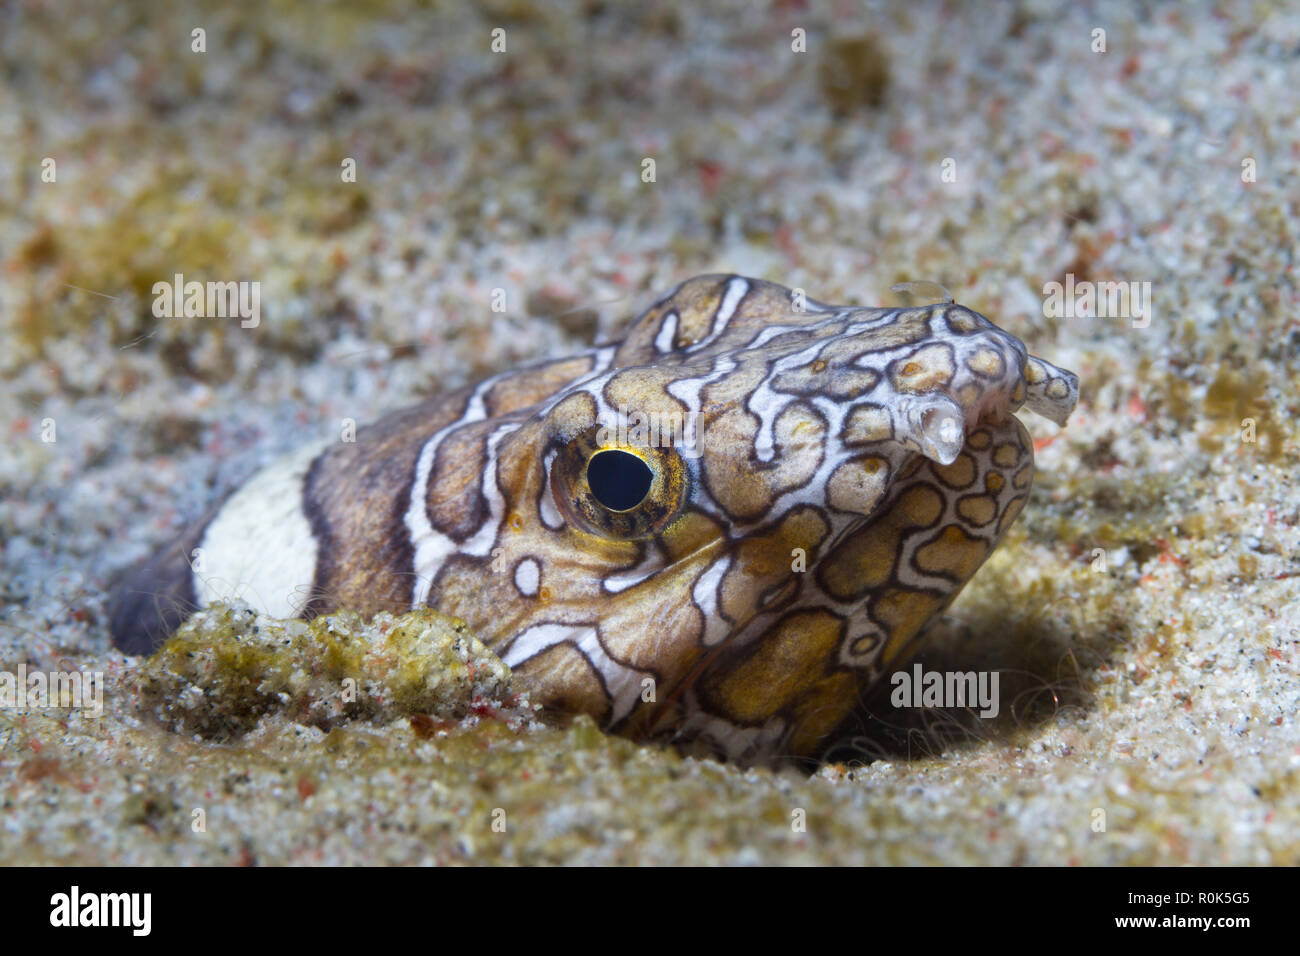 Clown snake eel hiding in the sand, Philippines. Stock Photo